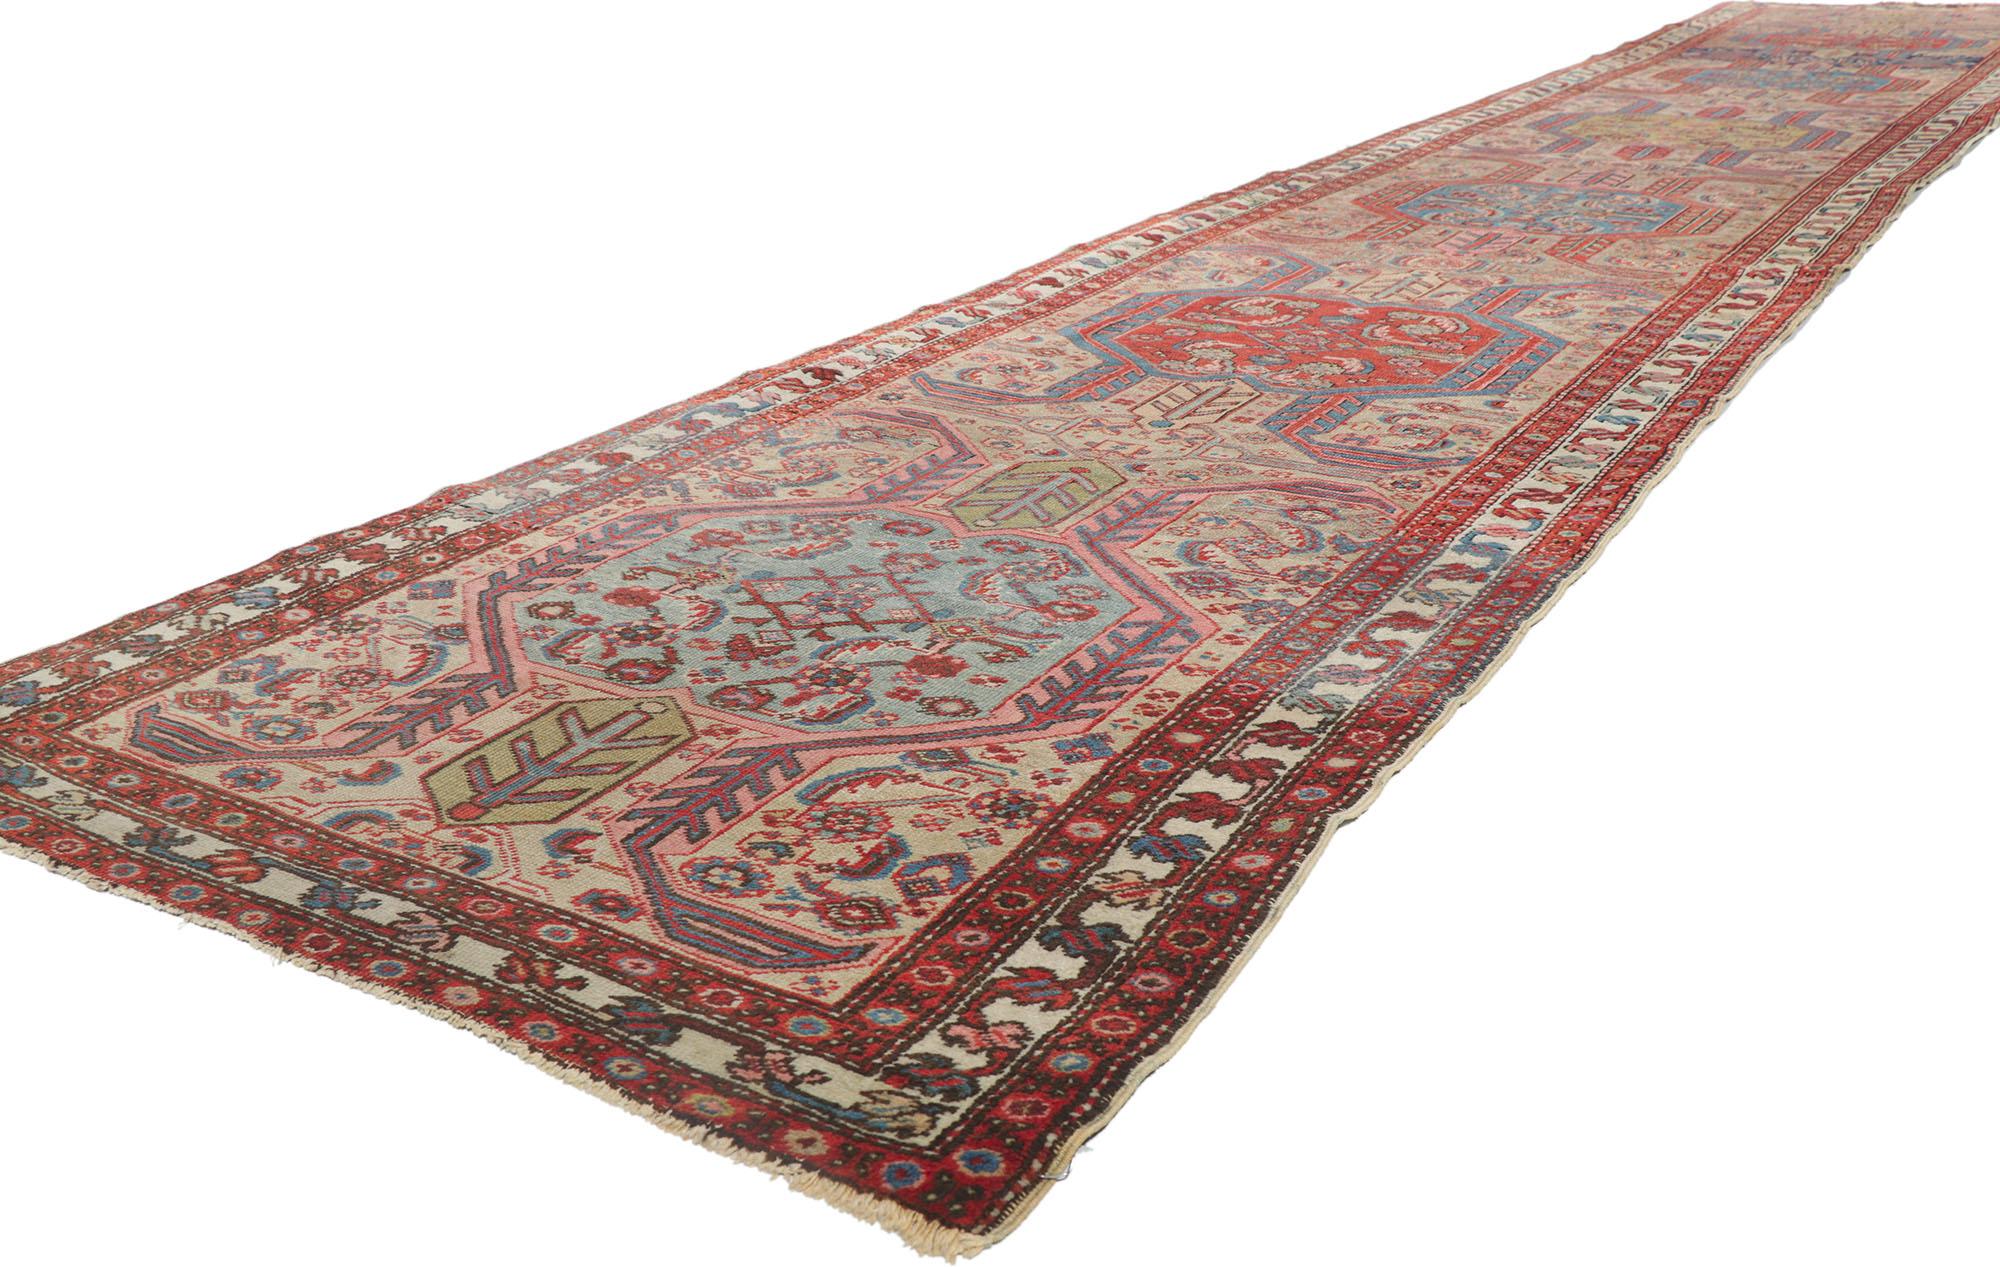 78282 Antique Persian Serapi runner 3'02 x 18'04. Full of tiny details and a bold expressive design combined with tribal style, this hand-knotted wool antique Persian Serapi runner is a captivating vision of woven beauty. The abrashed field features